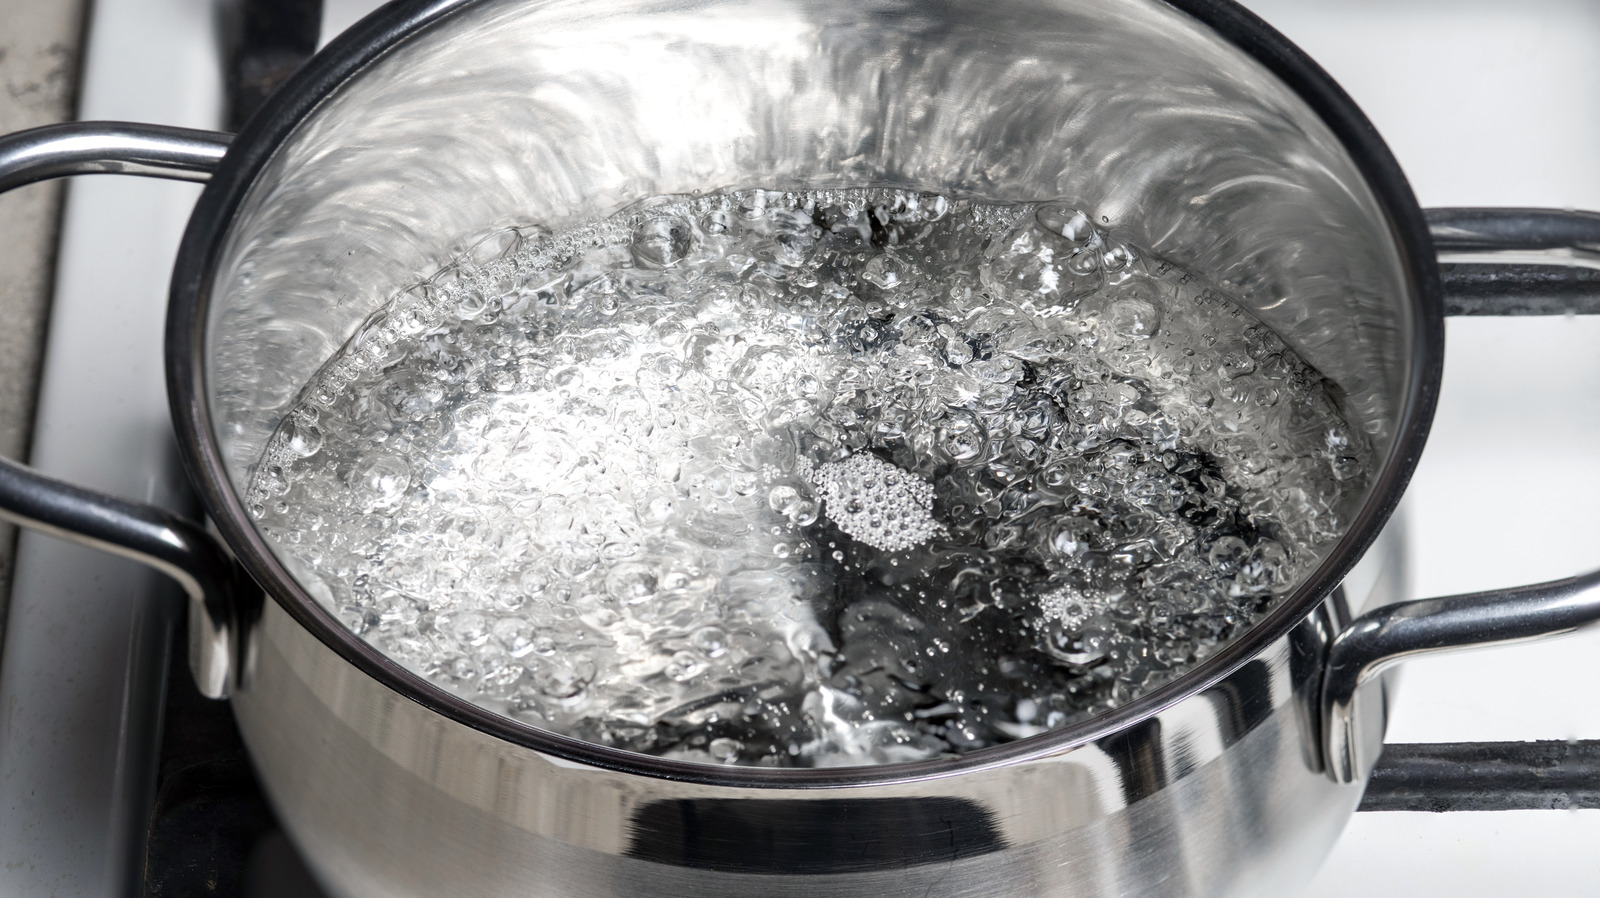 https://www.foodrepublic.com/img/gallery/how-to-speed-up-boiling-water-on-the-stove-with-just-a-pan/l-intro-1689099808.jpg